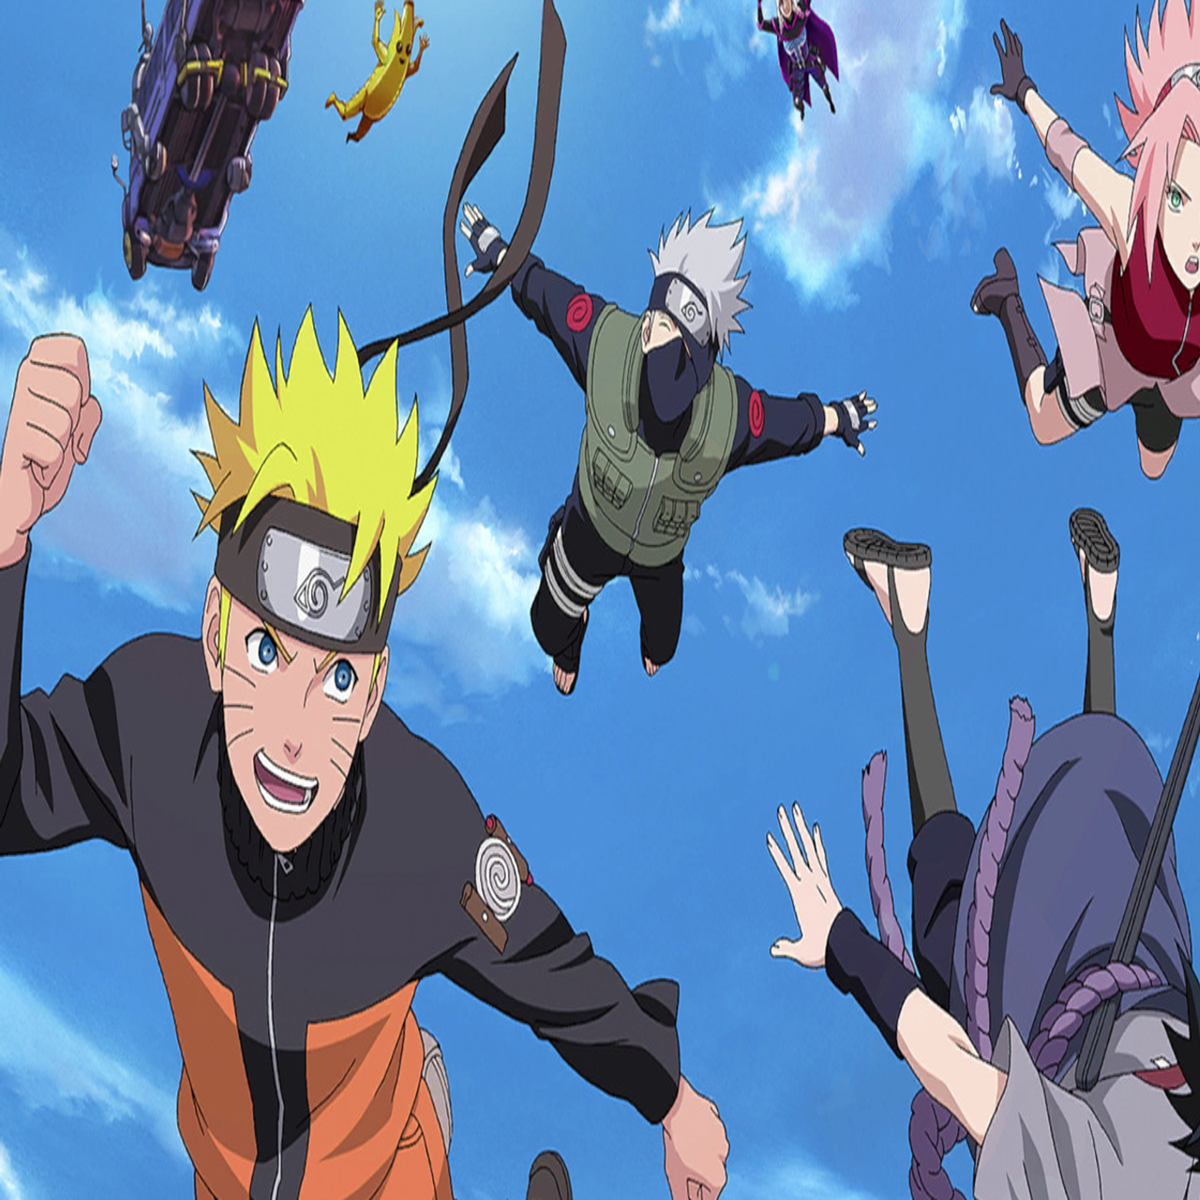 Naruto Rivals Comes To Fortnite Starting On June 23rd